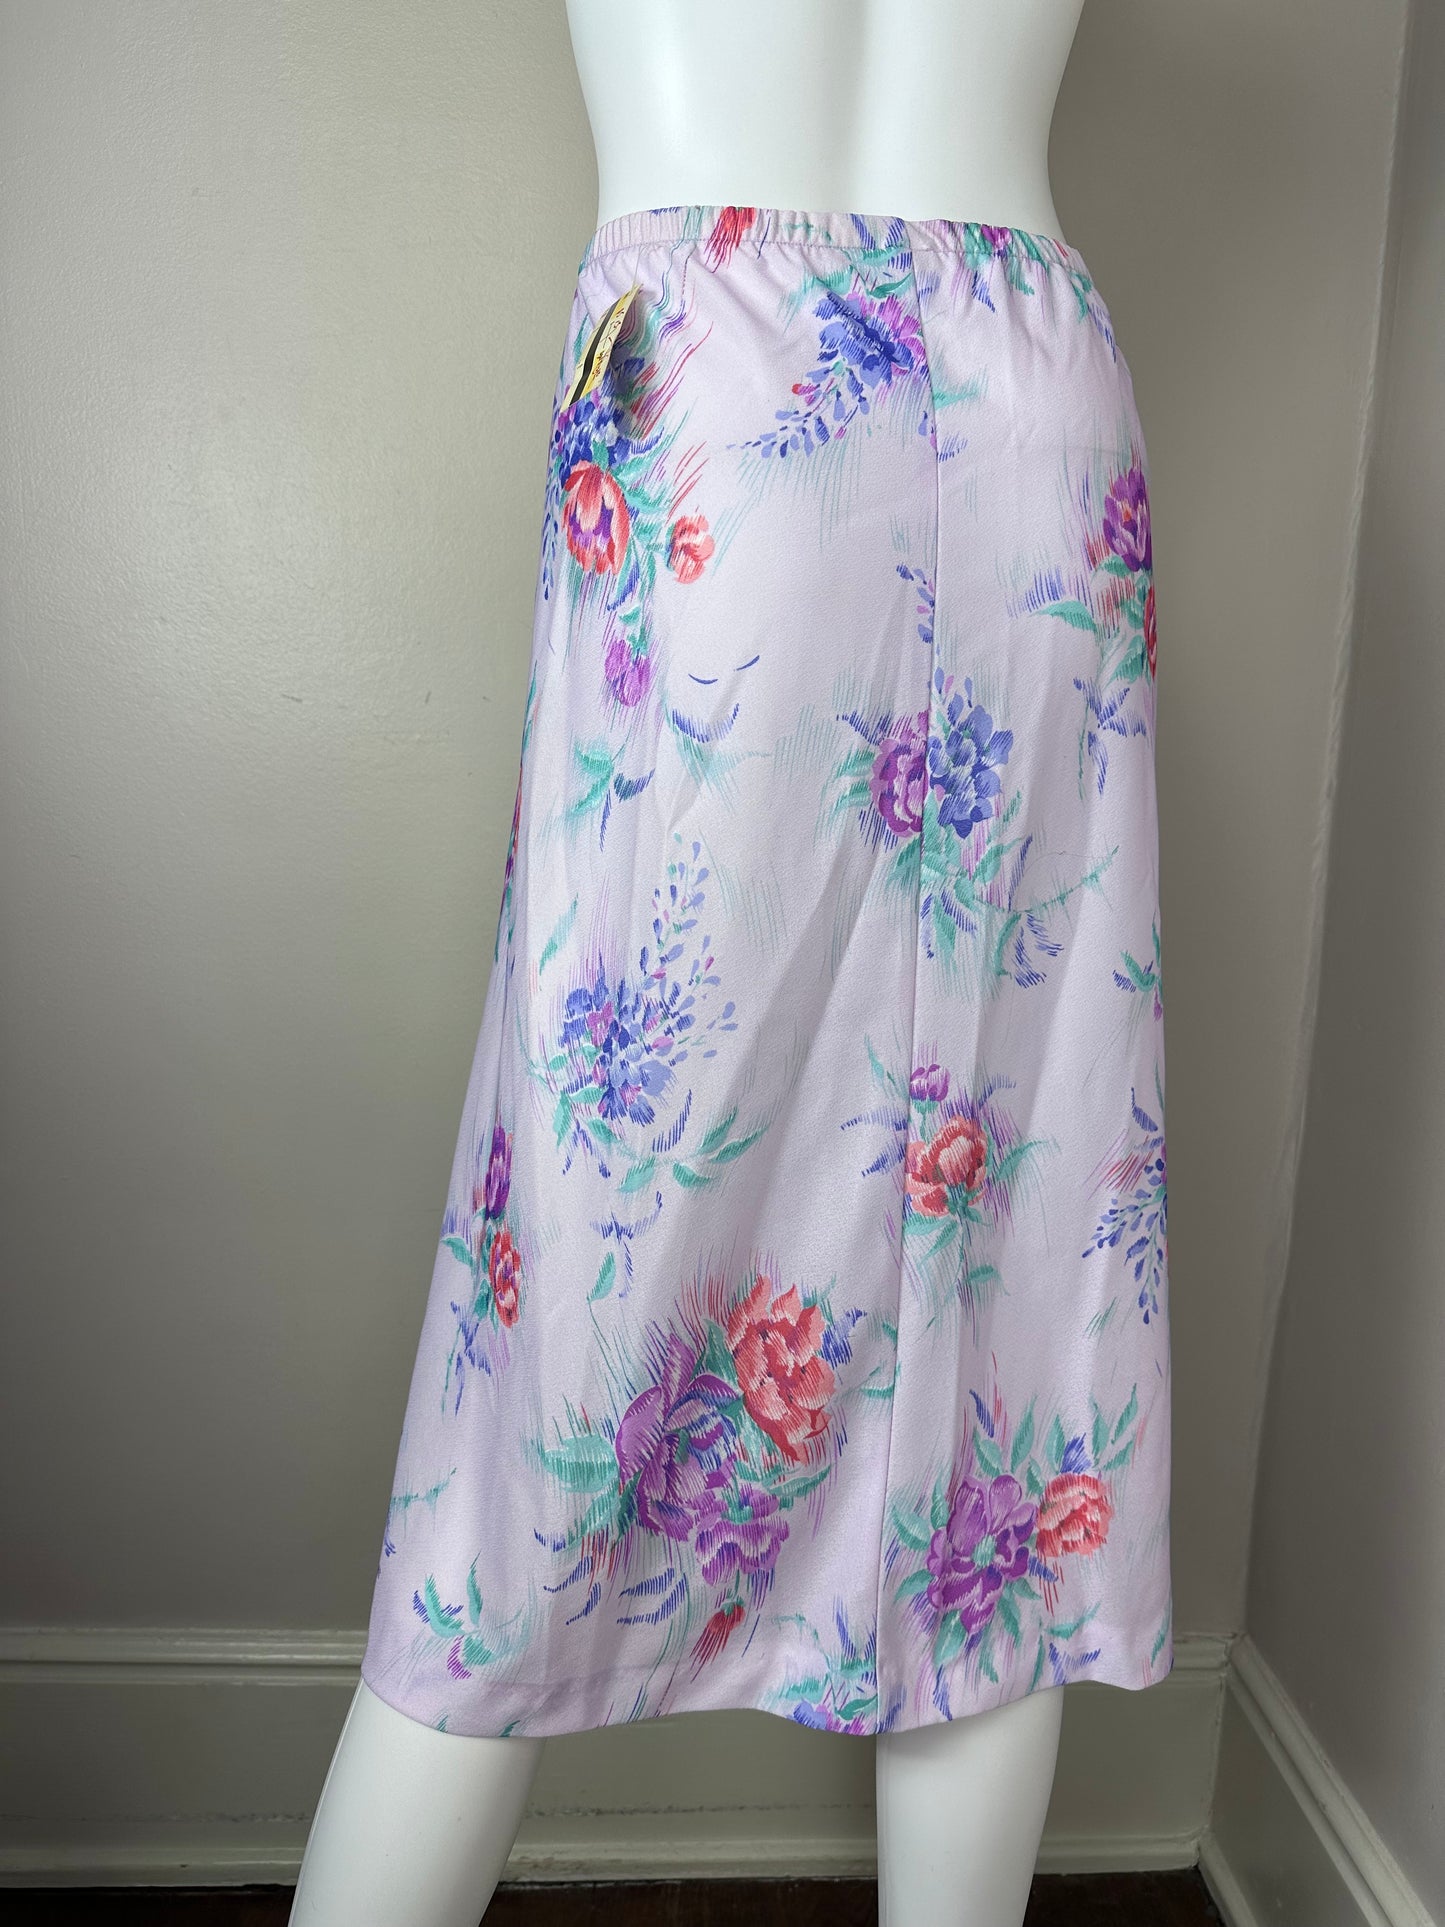 1970s/80s Plus Size Purple Floral Skirt, Size XL-XXL Deadstock with Tags